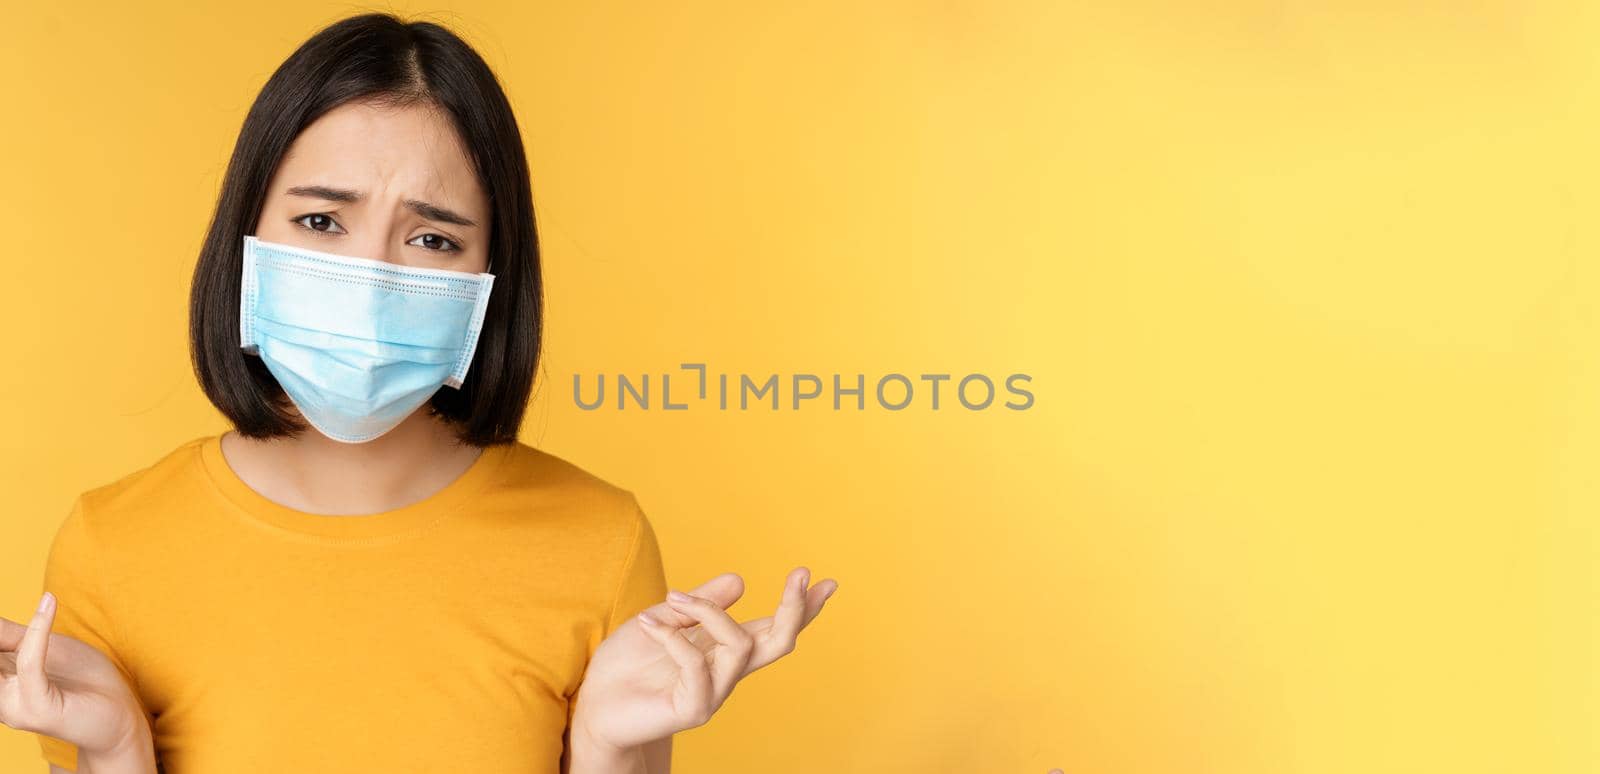 Close up portrait of confused asian woman in medical face mask, shrugging shoulders and looking puzzled, standing against yellow background by Benzoix